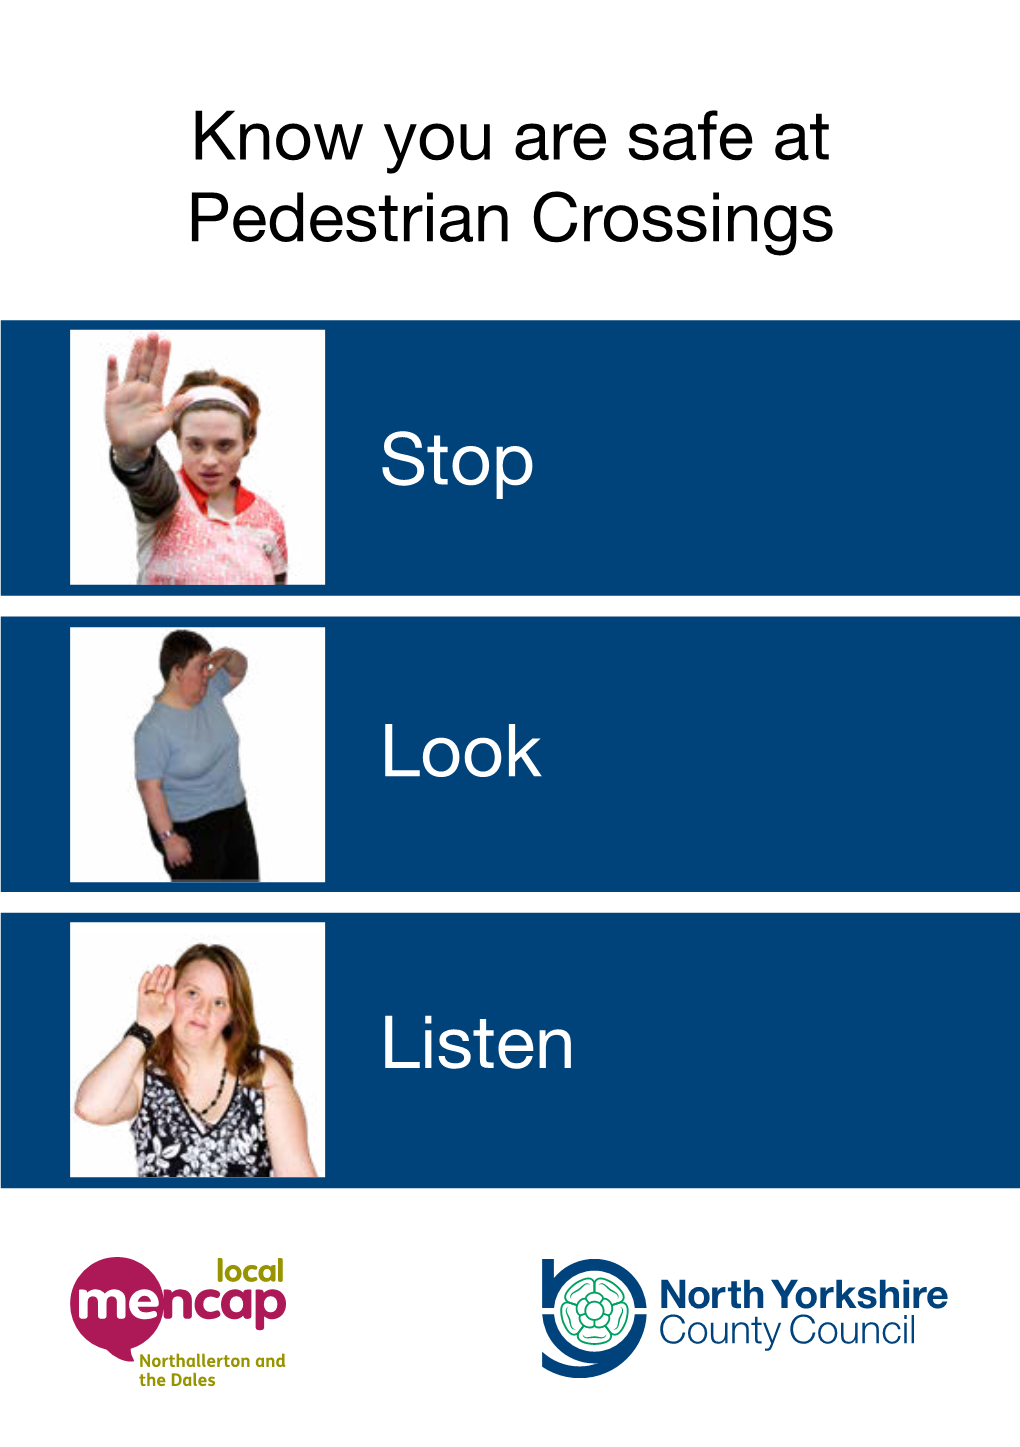 Know You Are Safe at Pedestrian Crossings